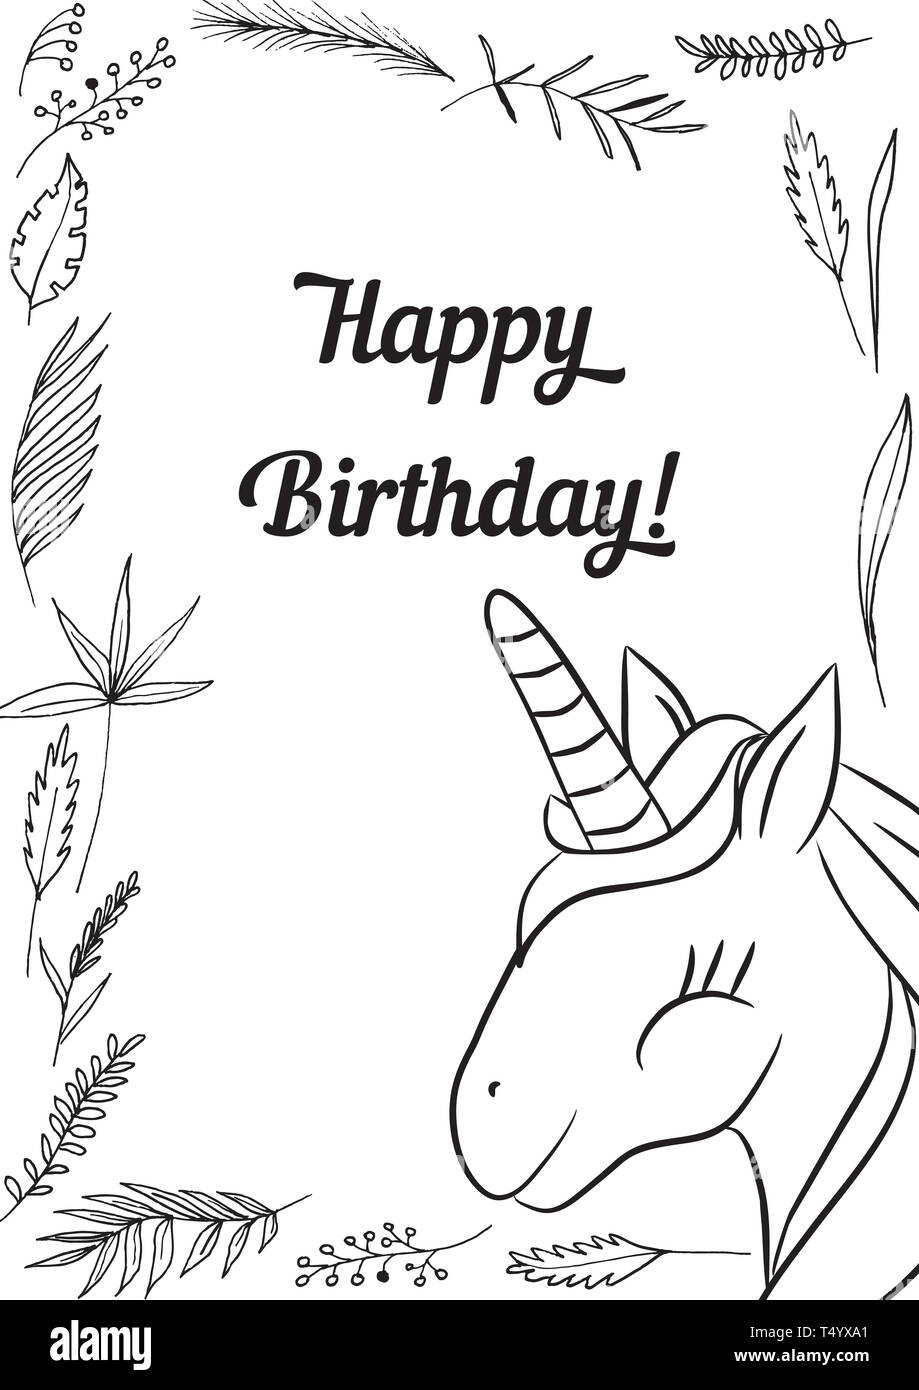 Illustration With Cute Mystic Unicorn Animal Black And White Simple Line Icon Coloring Page Magic Fantasy Party Children S Game Studying Theme Stock Photo Alamy Printable unicorn coloring pages ideas for kids happy birthday. https www alamy com illustration with cute mystic unicorn animal black and white simple line icon coloring page magic fantasy party childrens game studying theme image244017145 html